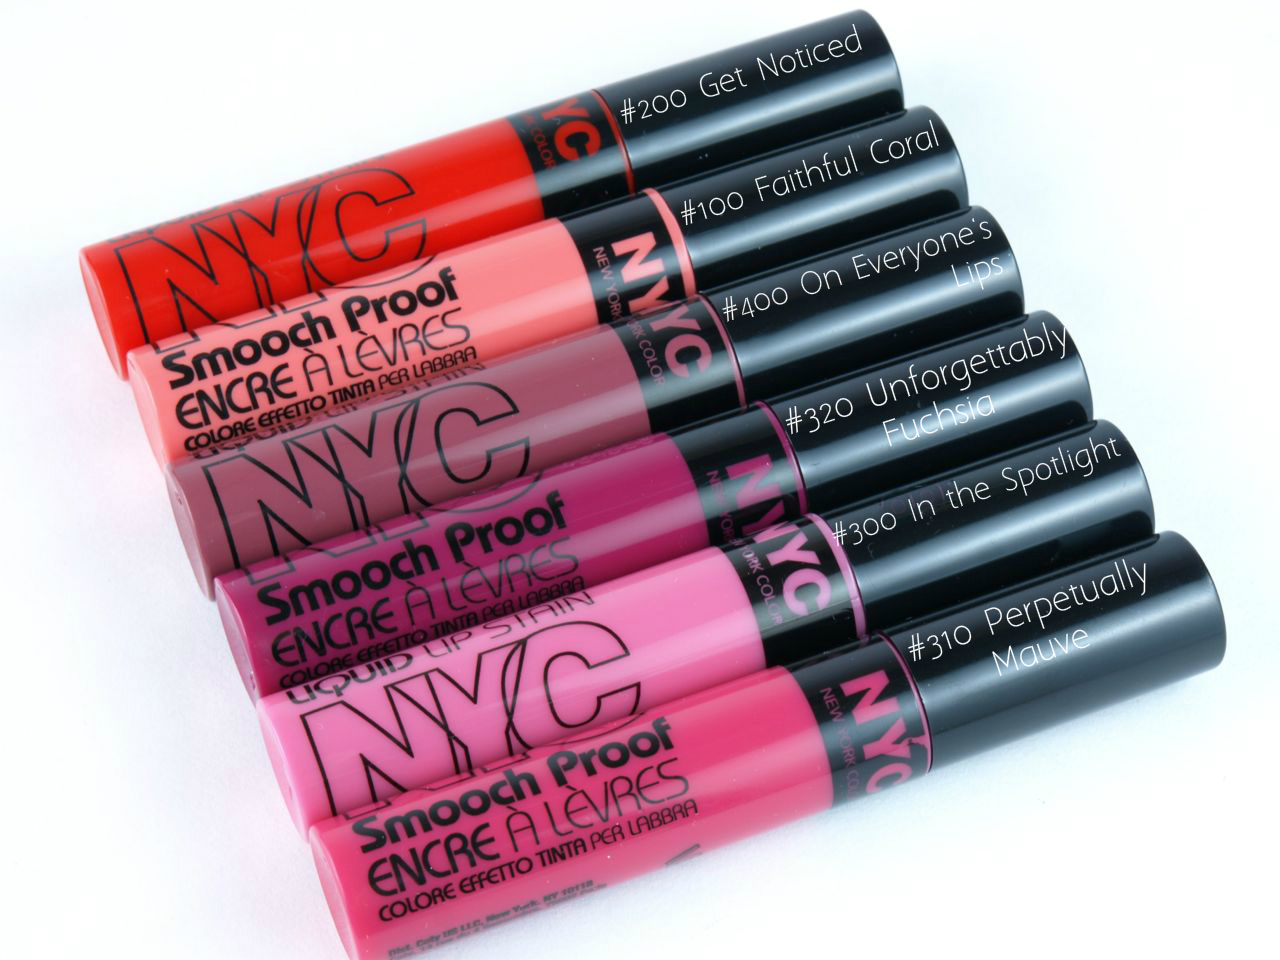 NYC New York Color Smooch Proof Liquid Lip Stain: Review and Swatches